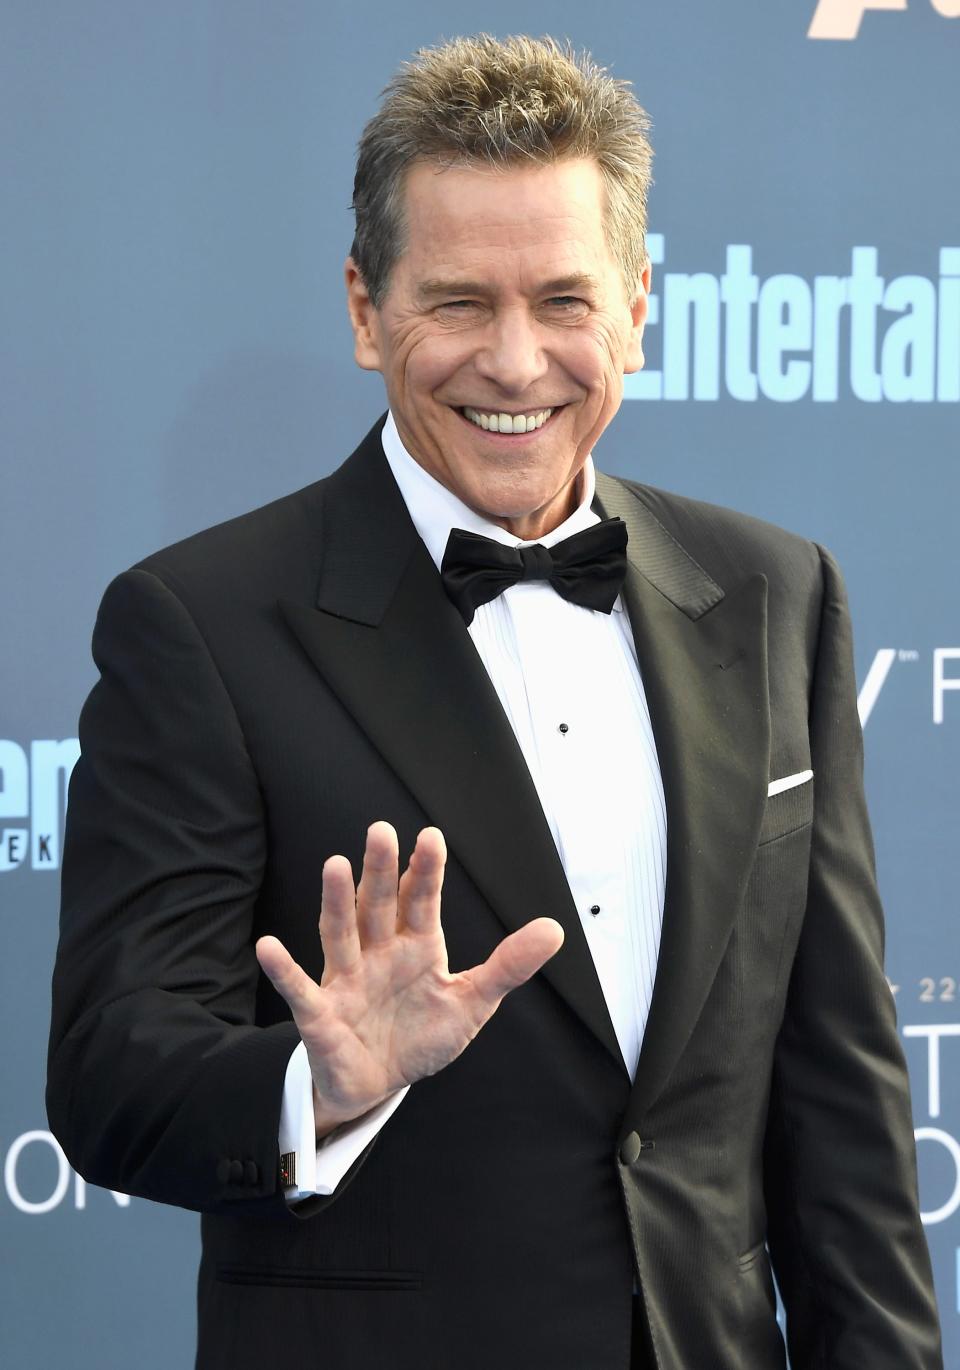 Tim Matheson, pictured here, is mourning the loss of his "beloved" ex-wife, former soap opera star Jennifer Leak D'Auria.